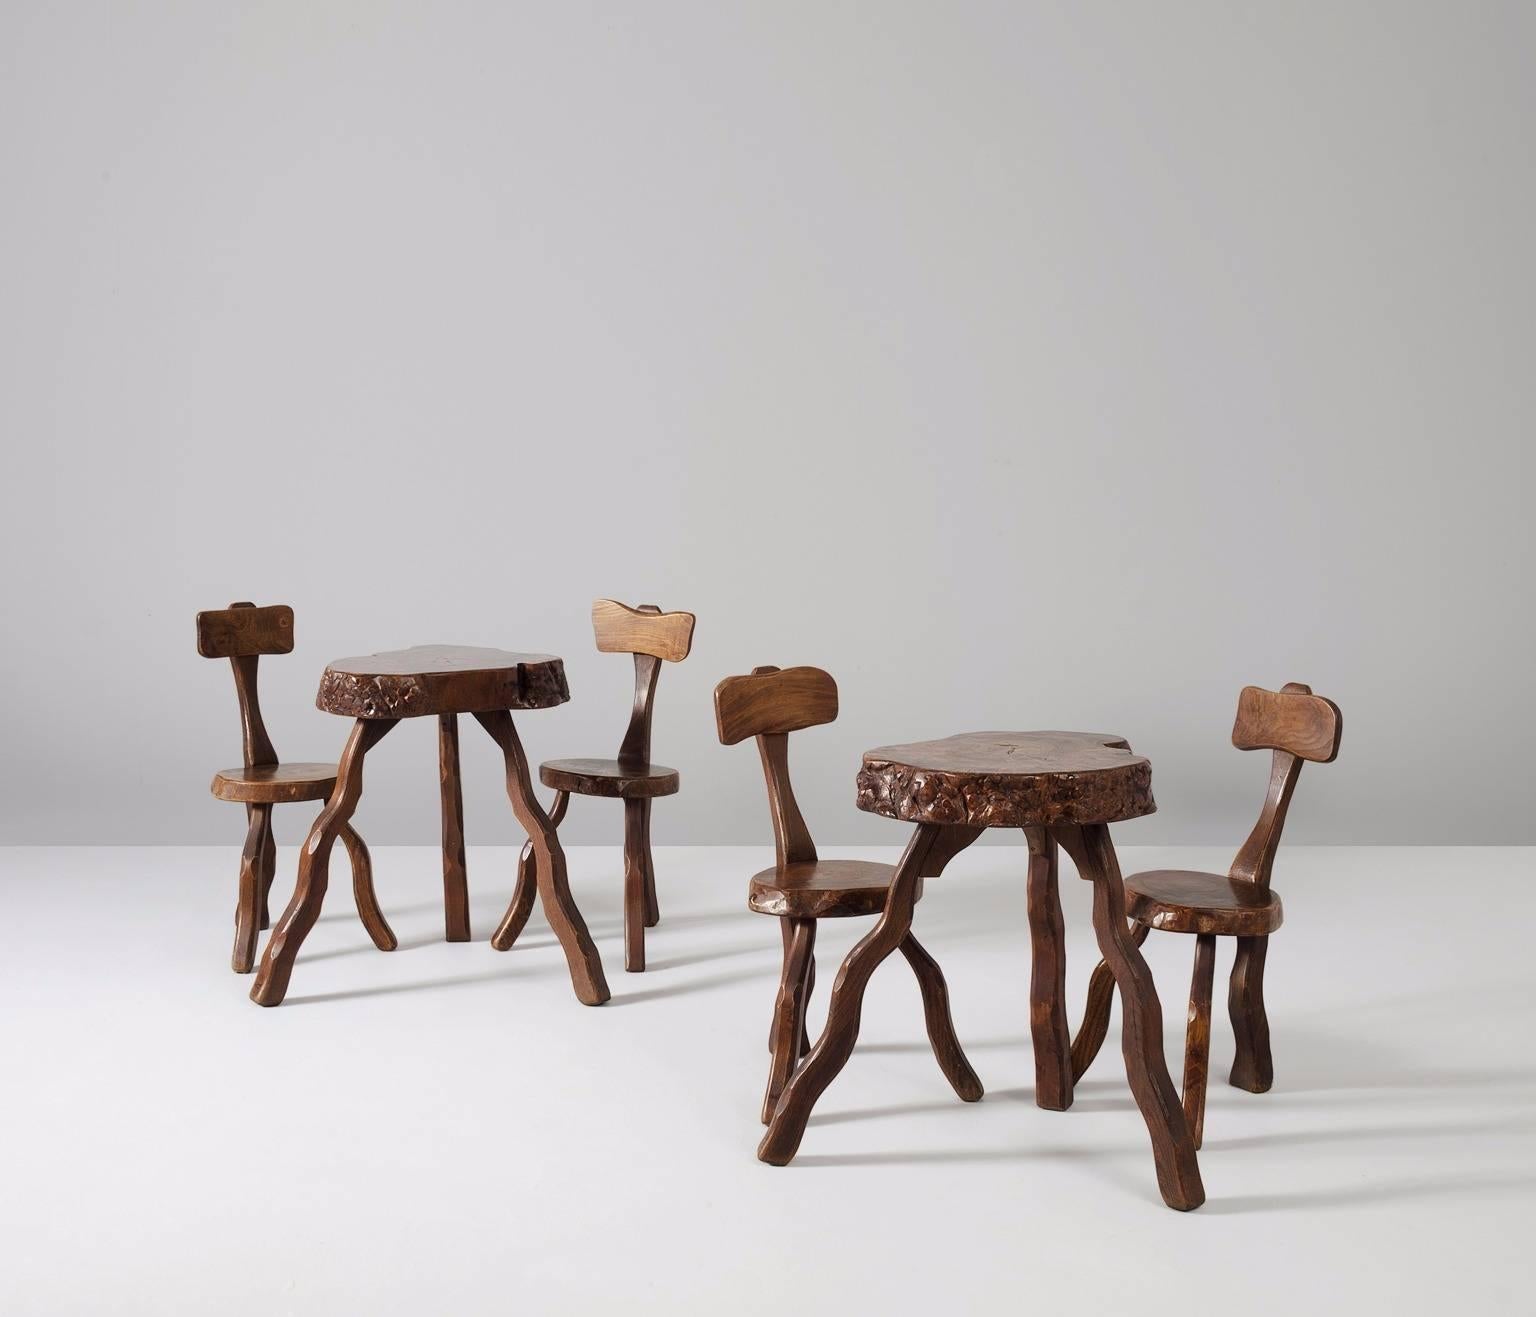 Two sets of root chairs and side tables, solid elmwood, France 1970s.  

Slab side tables in elm, solid and dark brown stained. These three-legged tables have a capricious appearance, due to the natural form and structure of the wood.  

Simplistic